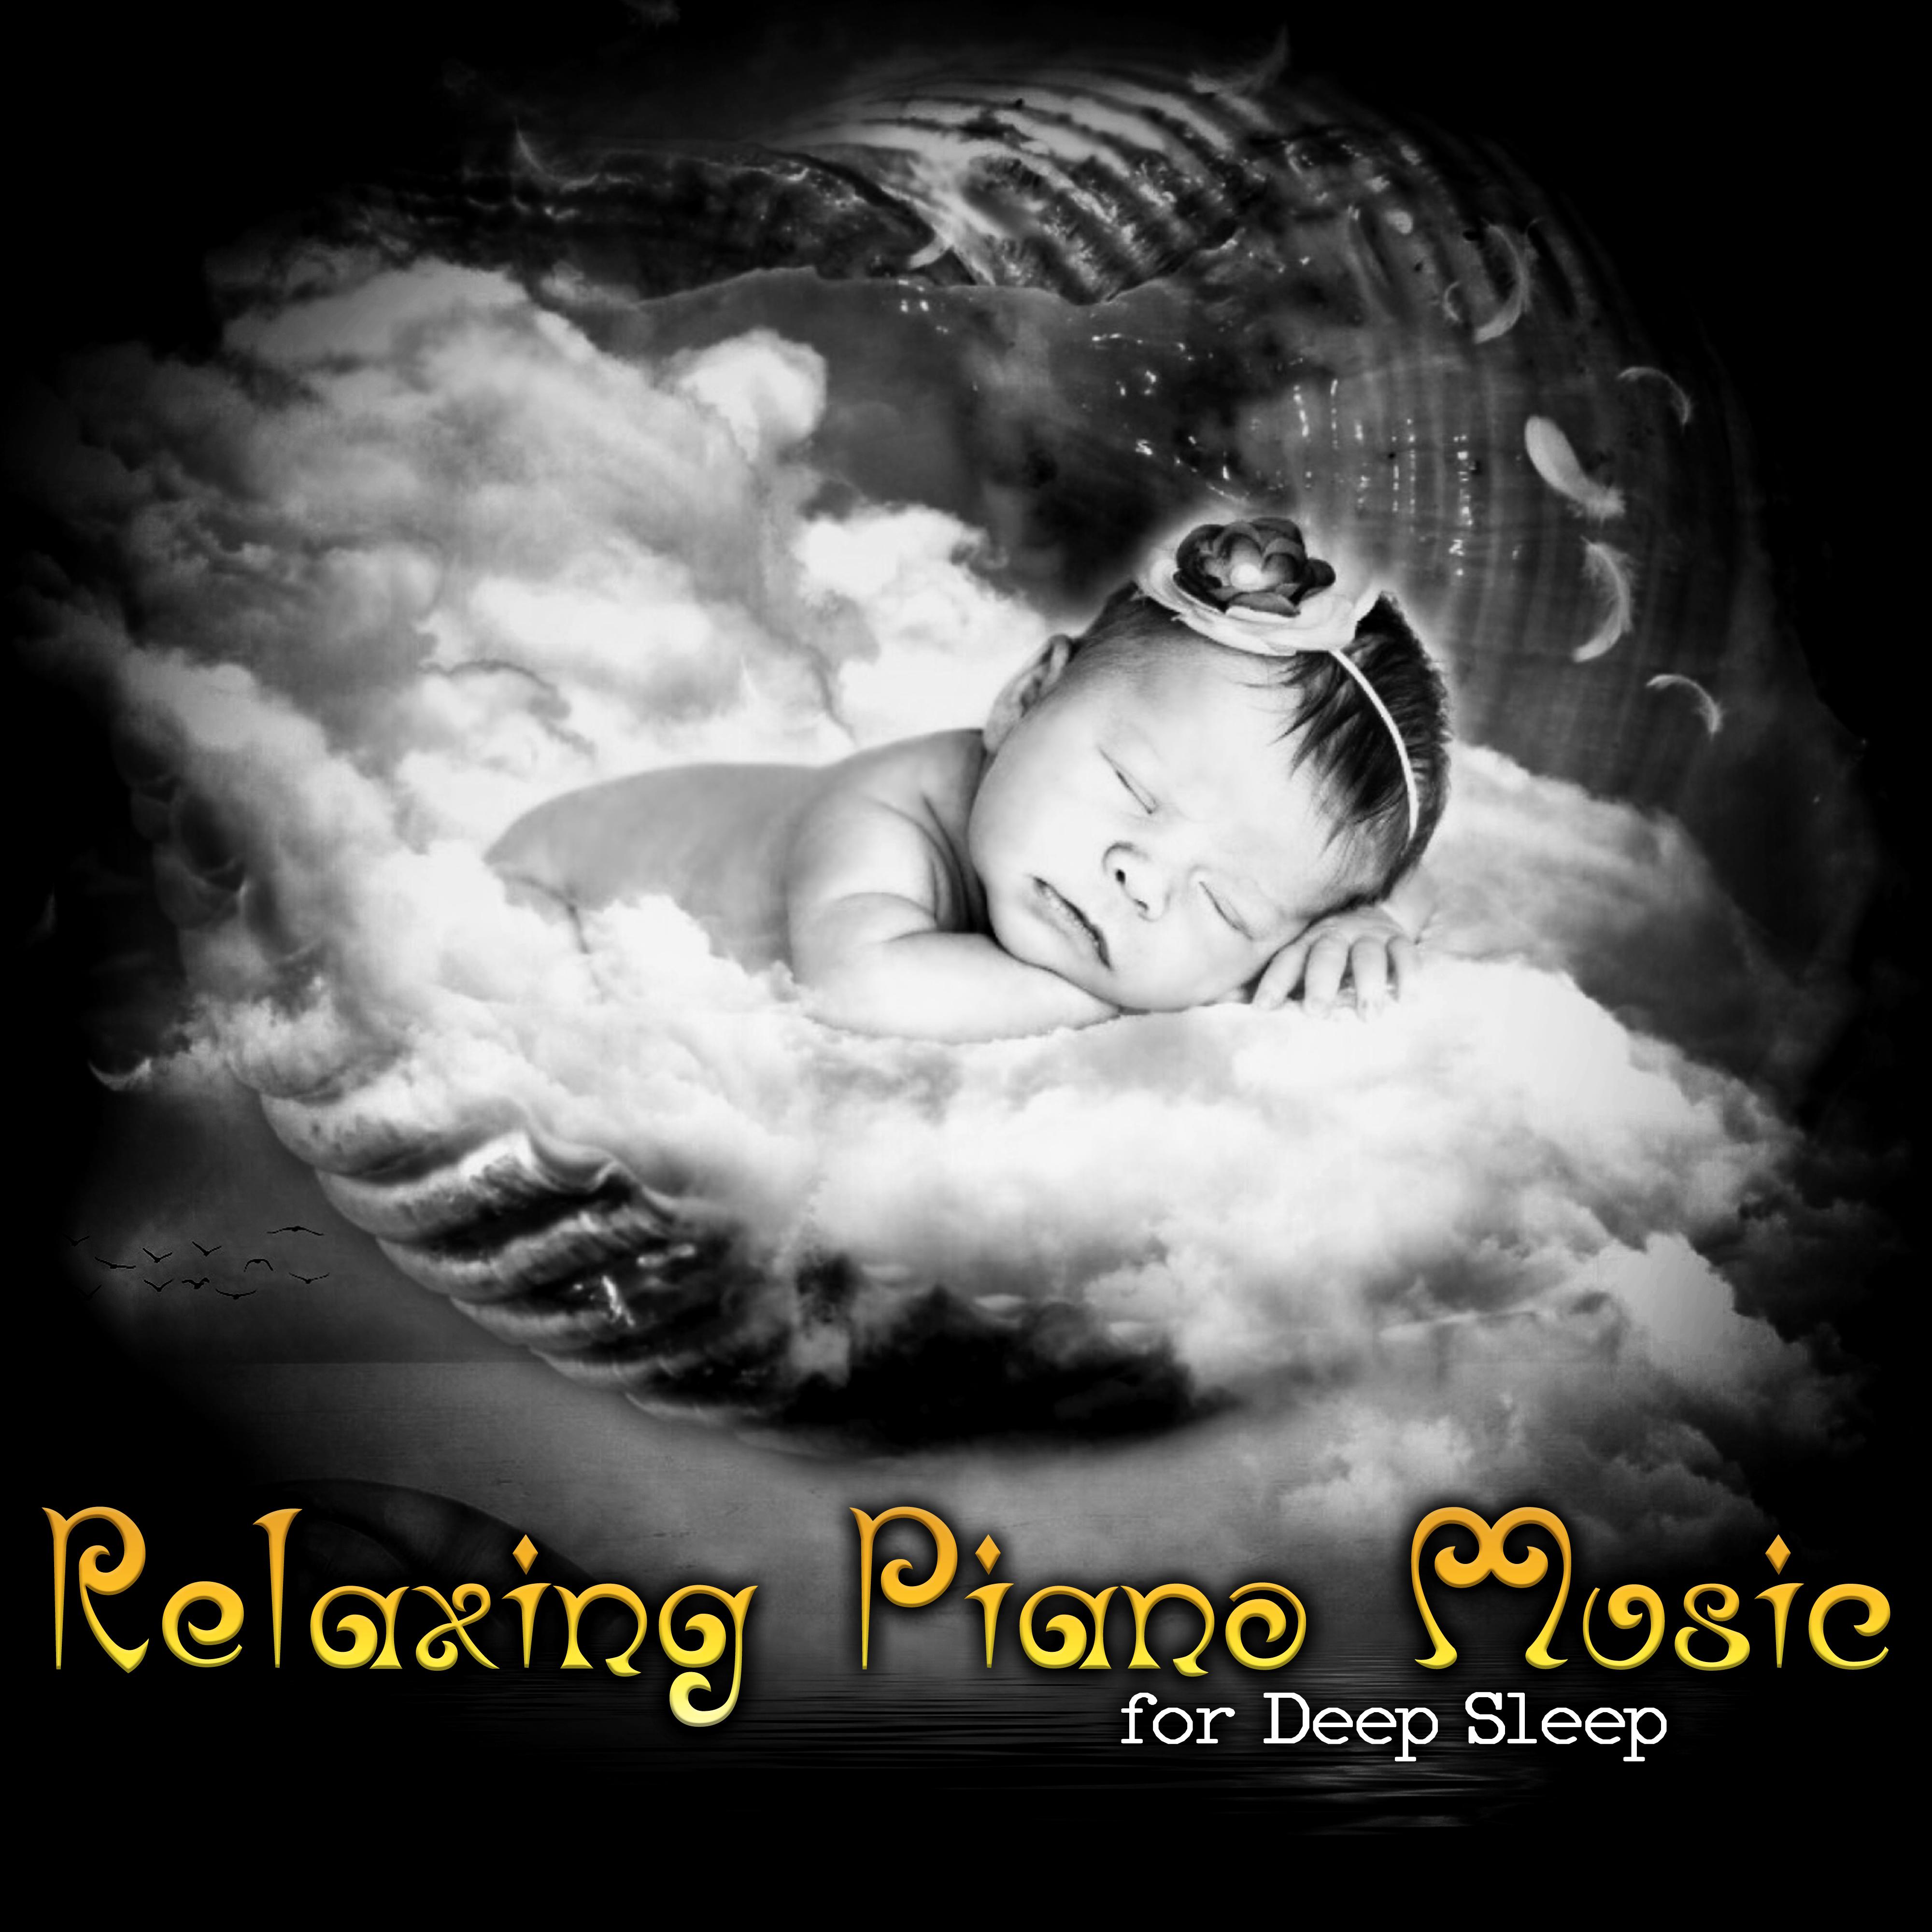 Relaxing Piano Music for Deep Sleep  New Age Music for Babies, Soothing Sounds for Relaxation, White Noise to Fall Asleep, Close Your Eyes